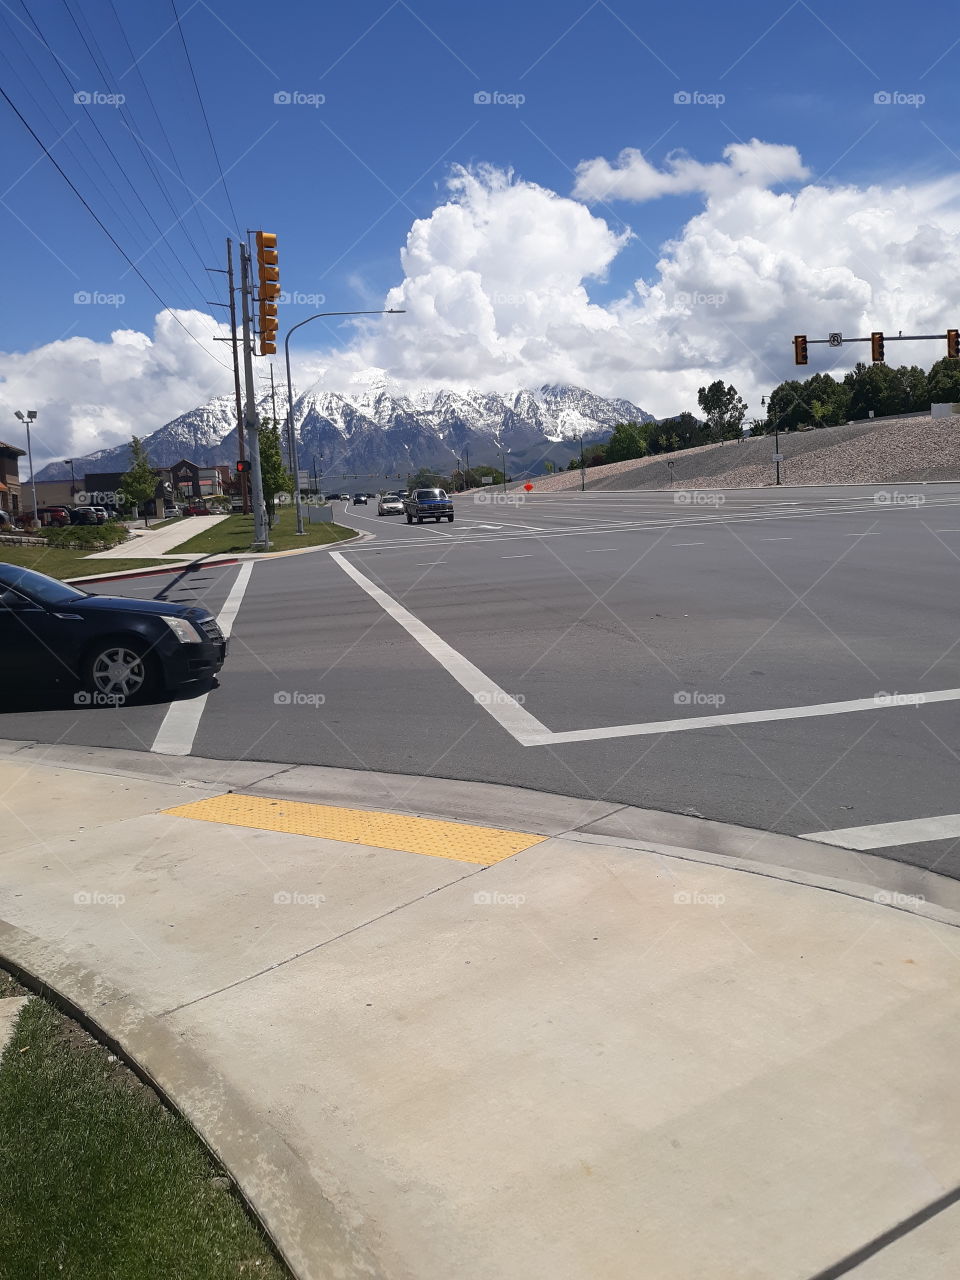 city street in Utah with a mountain backdrop